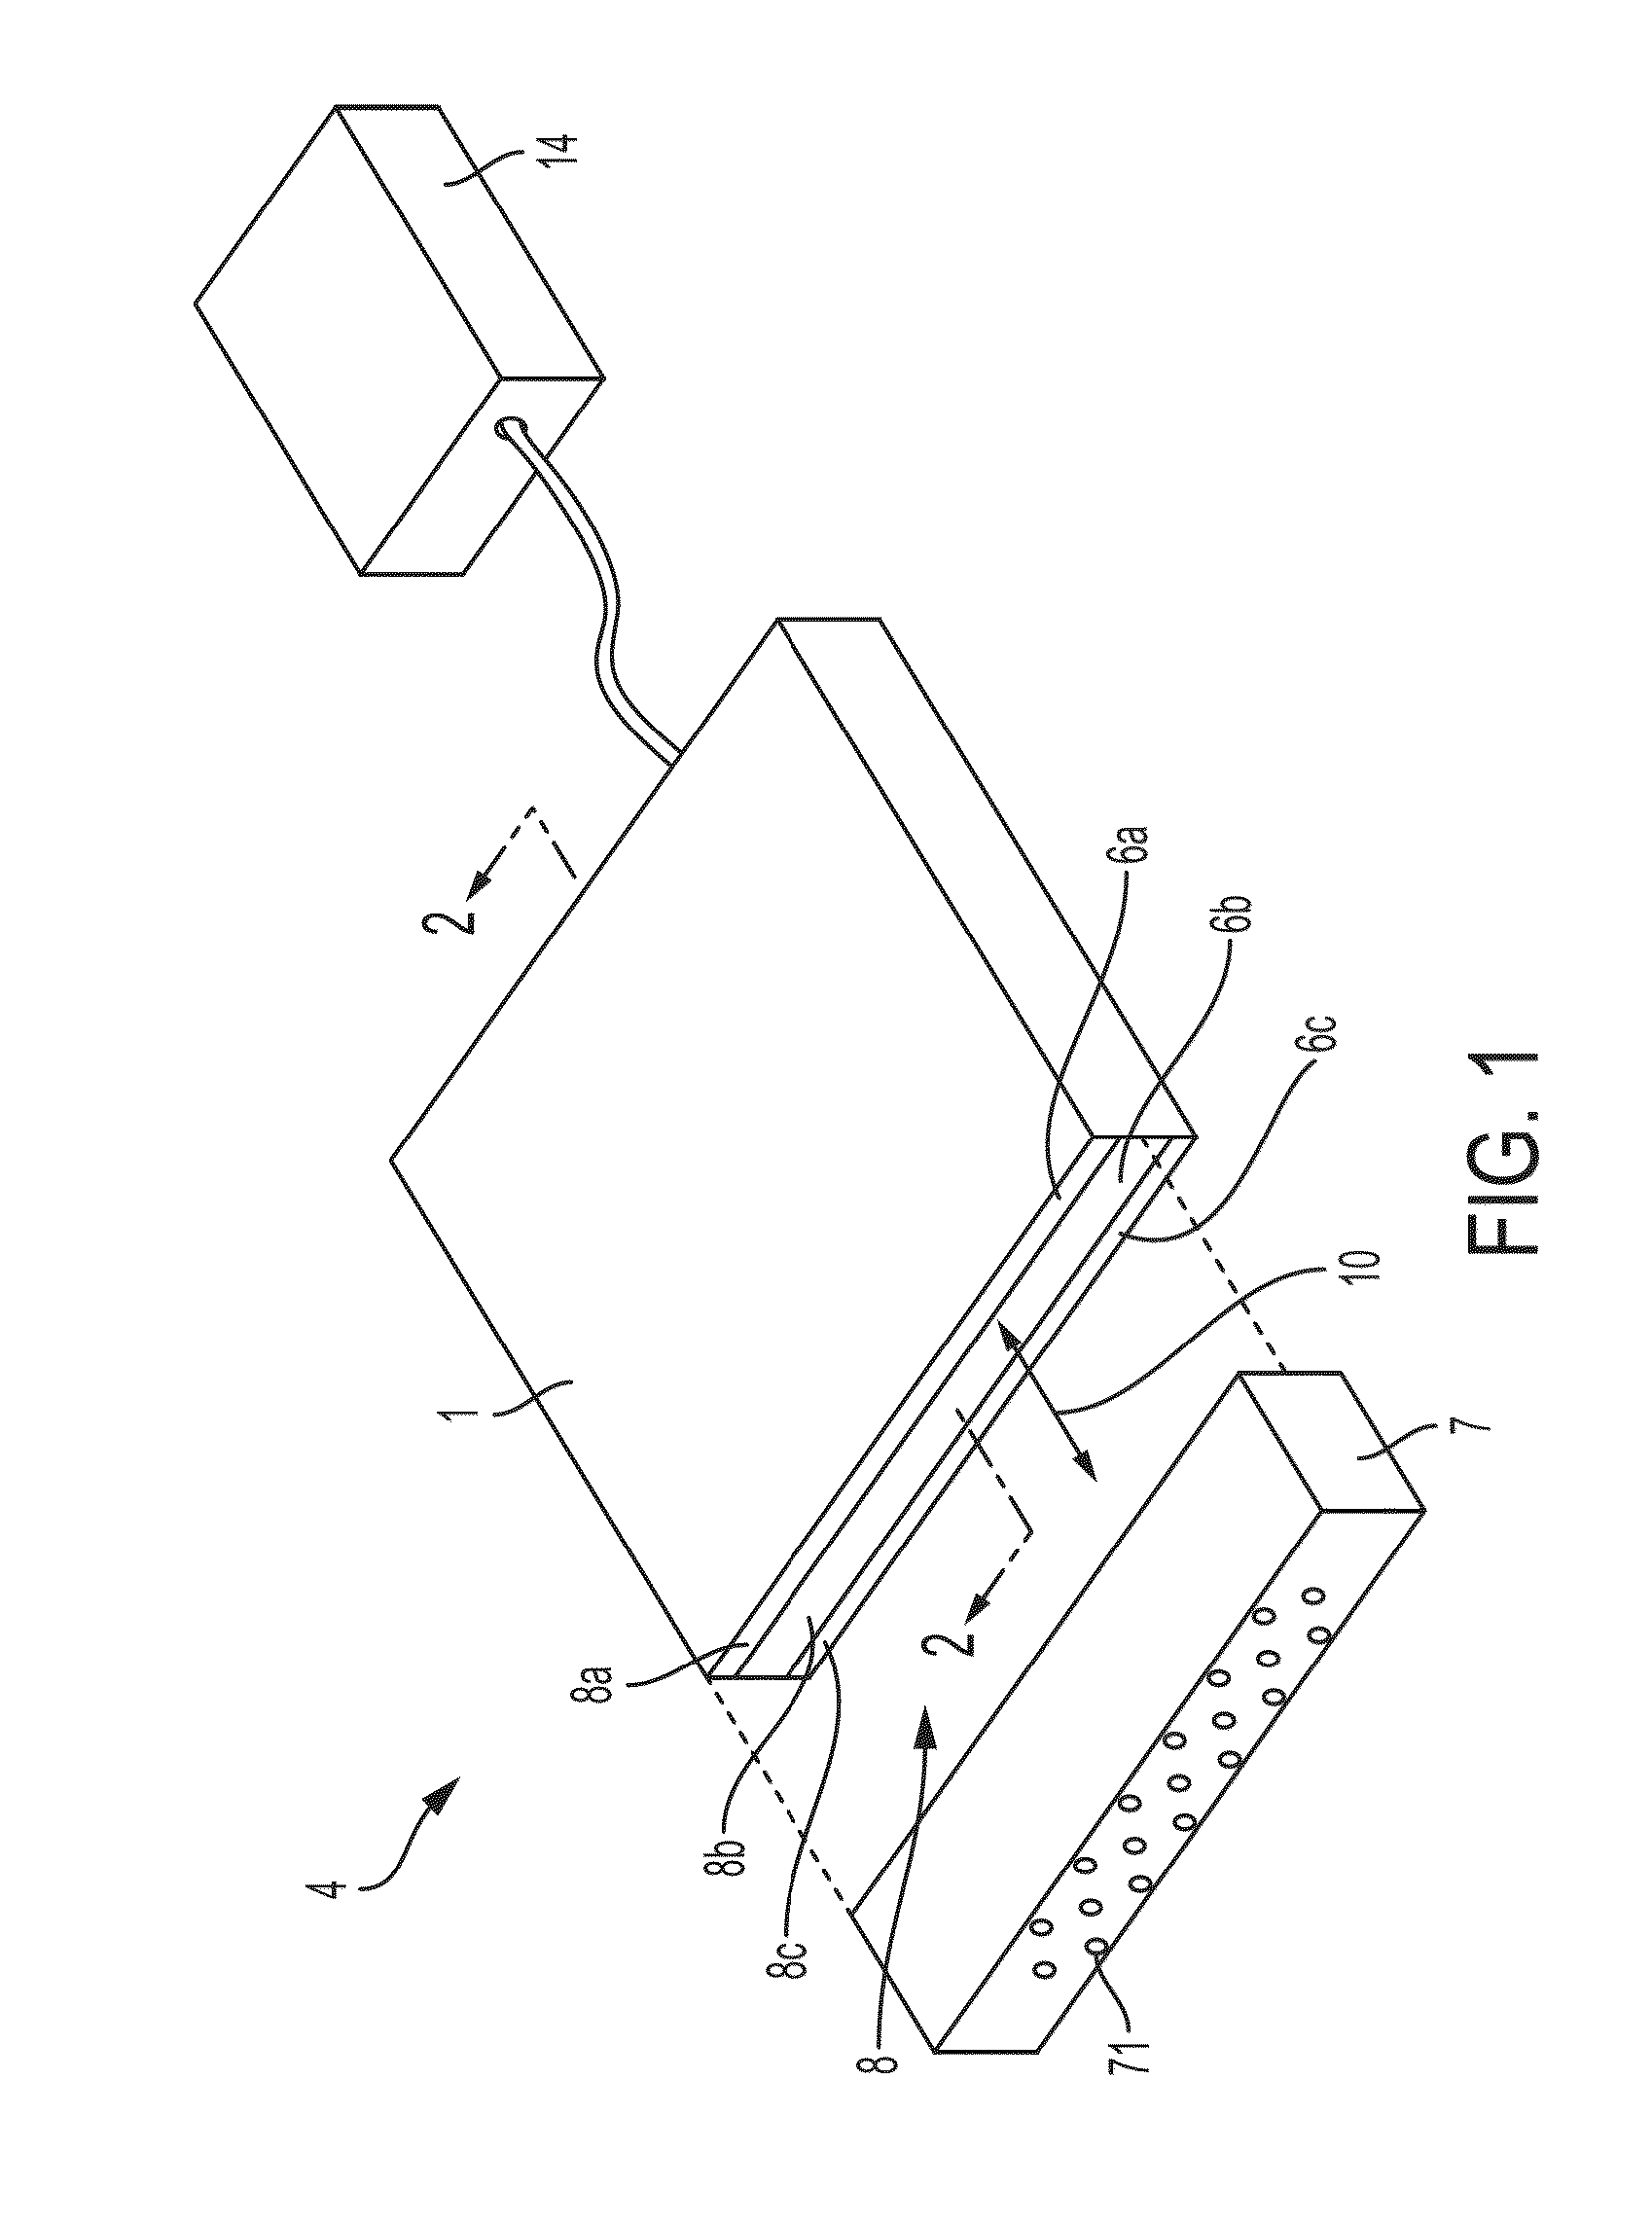 Planar coil and support for actuator of fluid mover